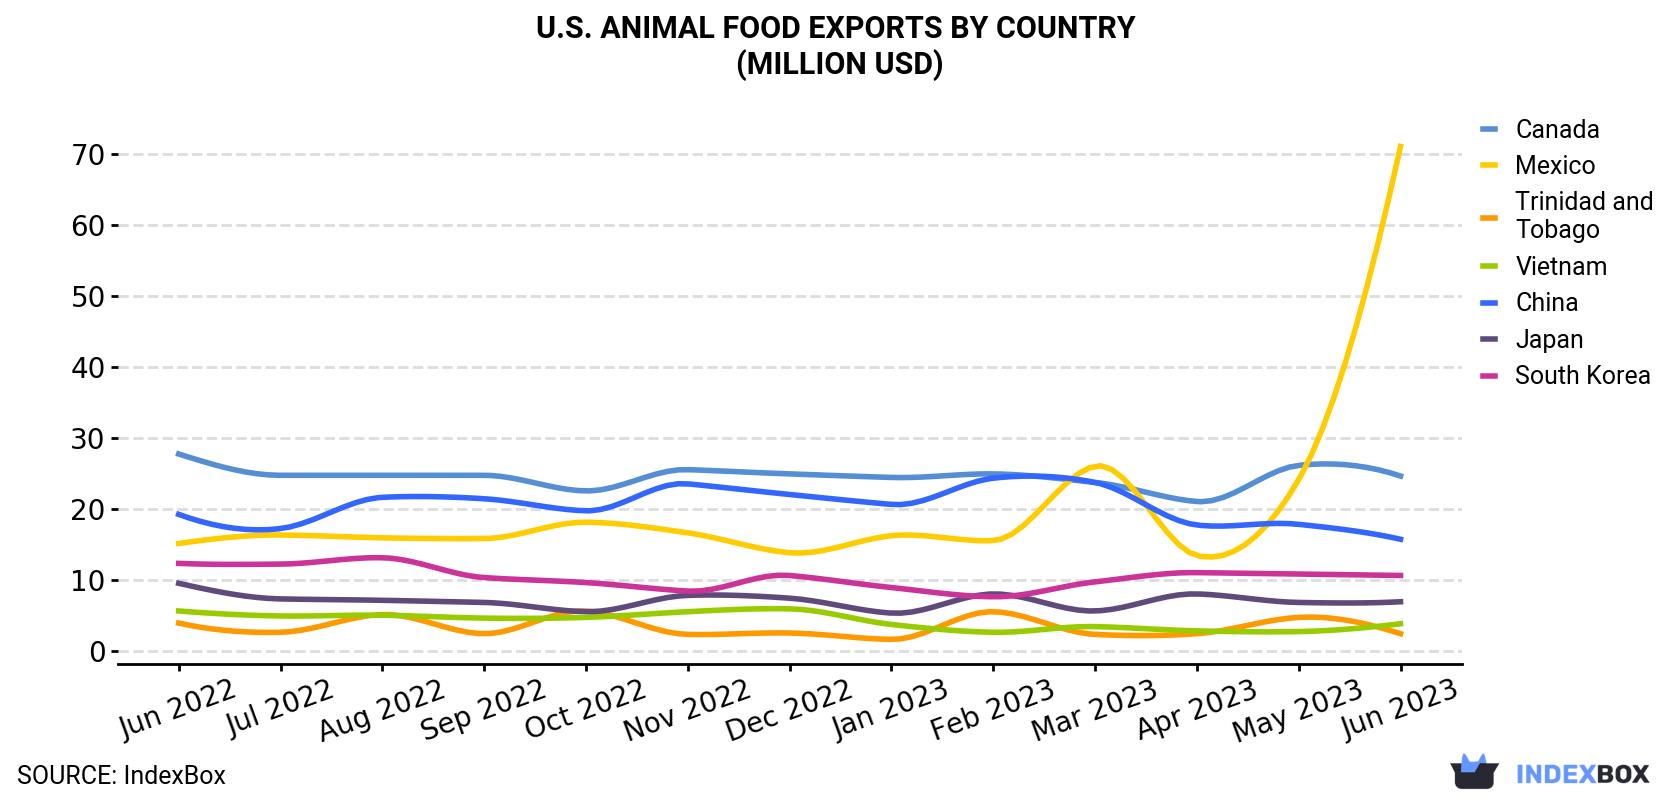 U.S. Animal Food Exports By Country (Million USD)